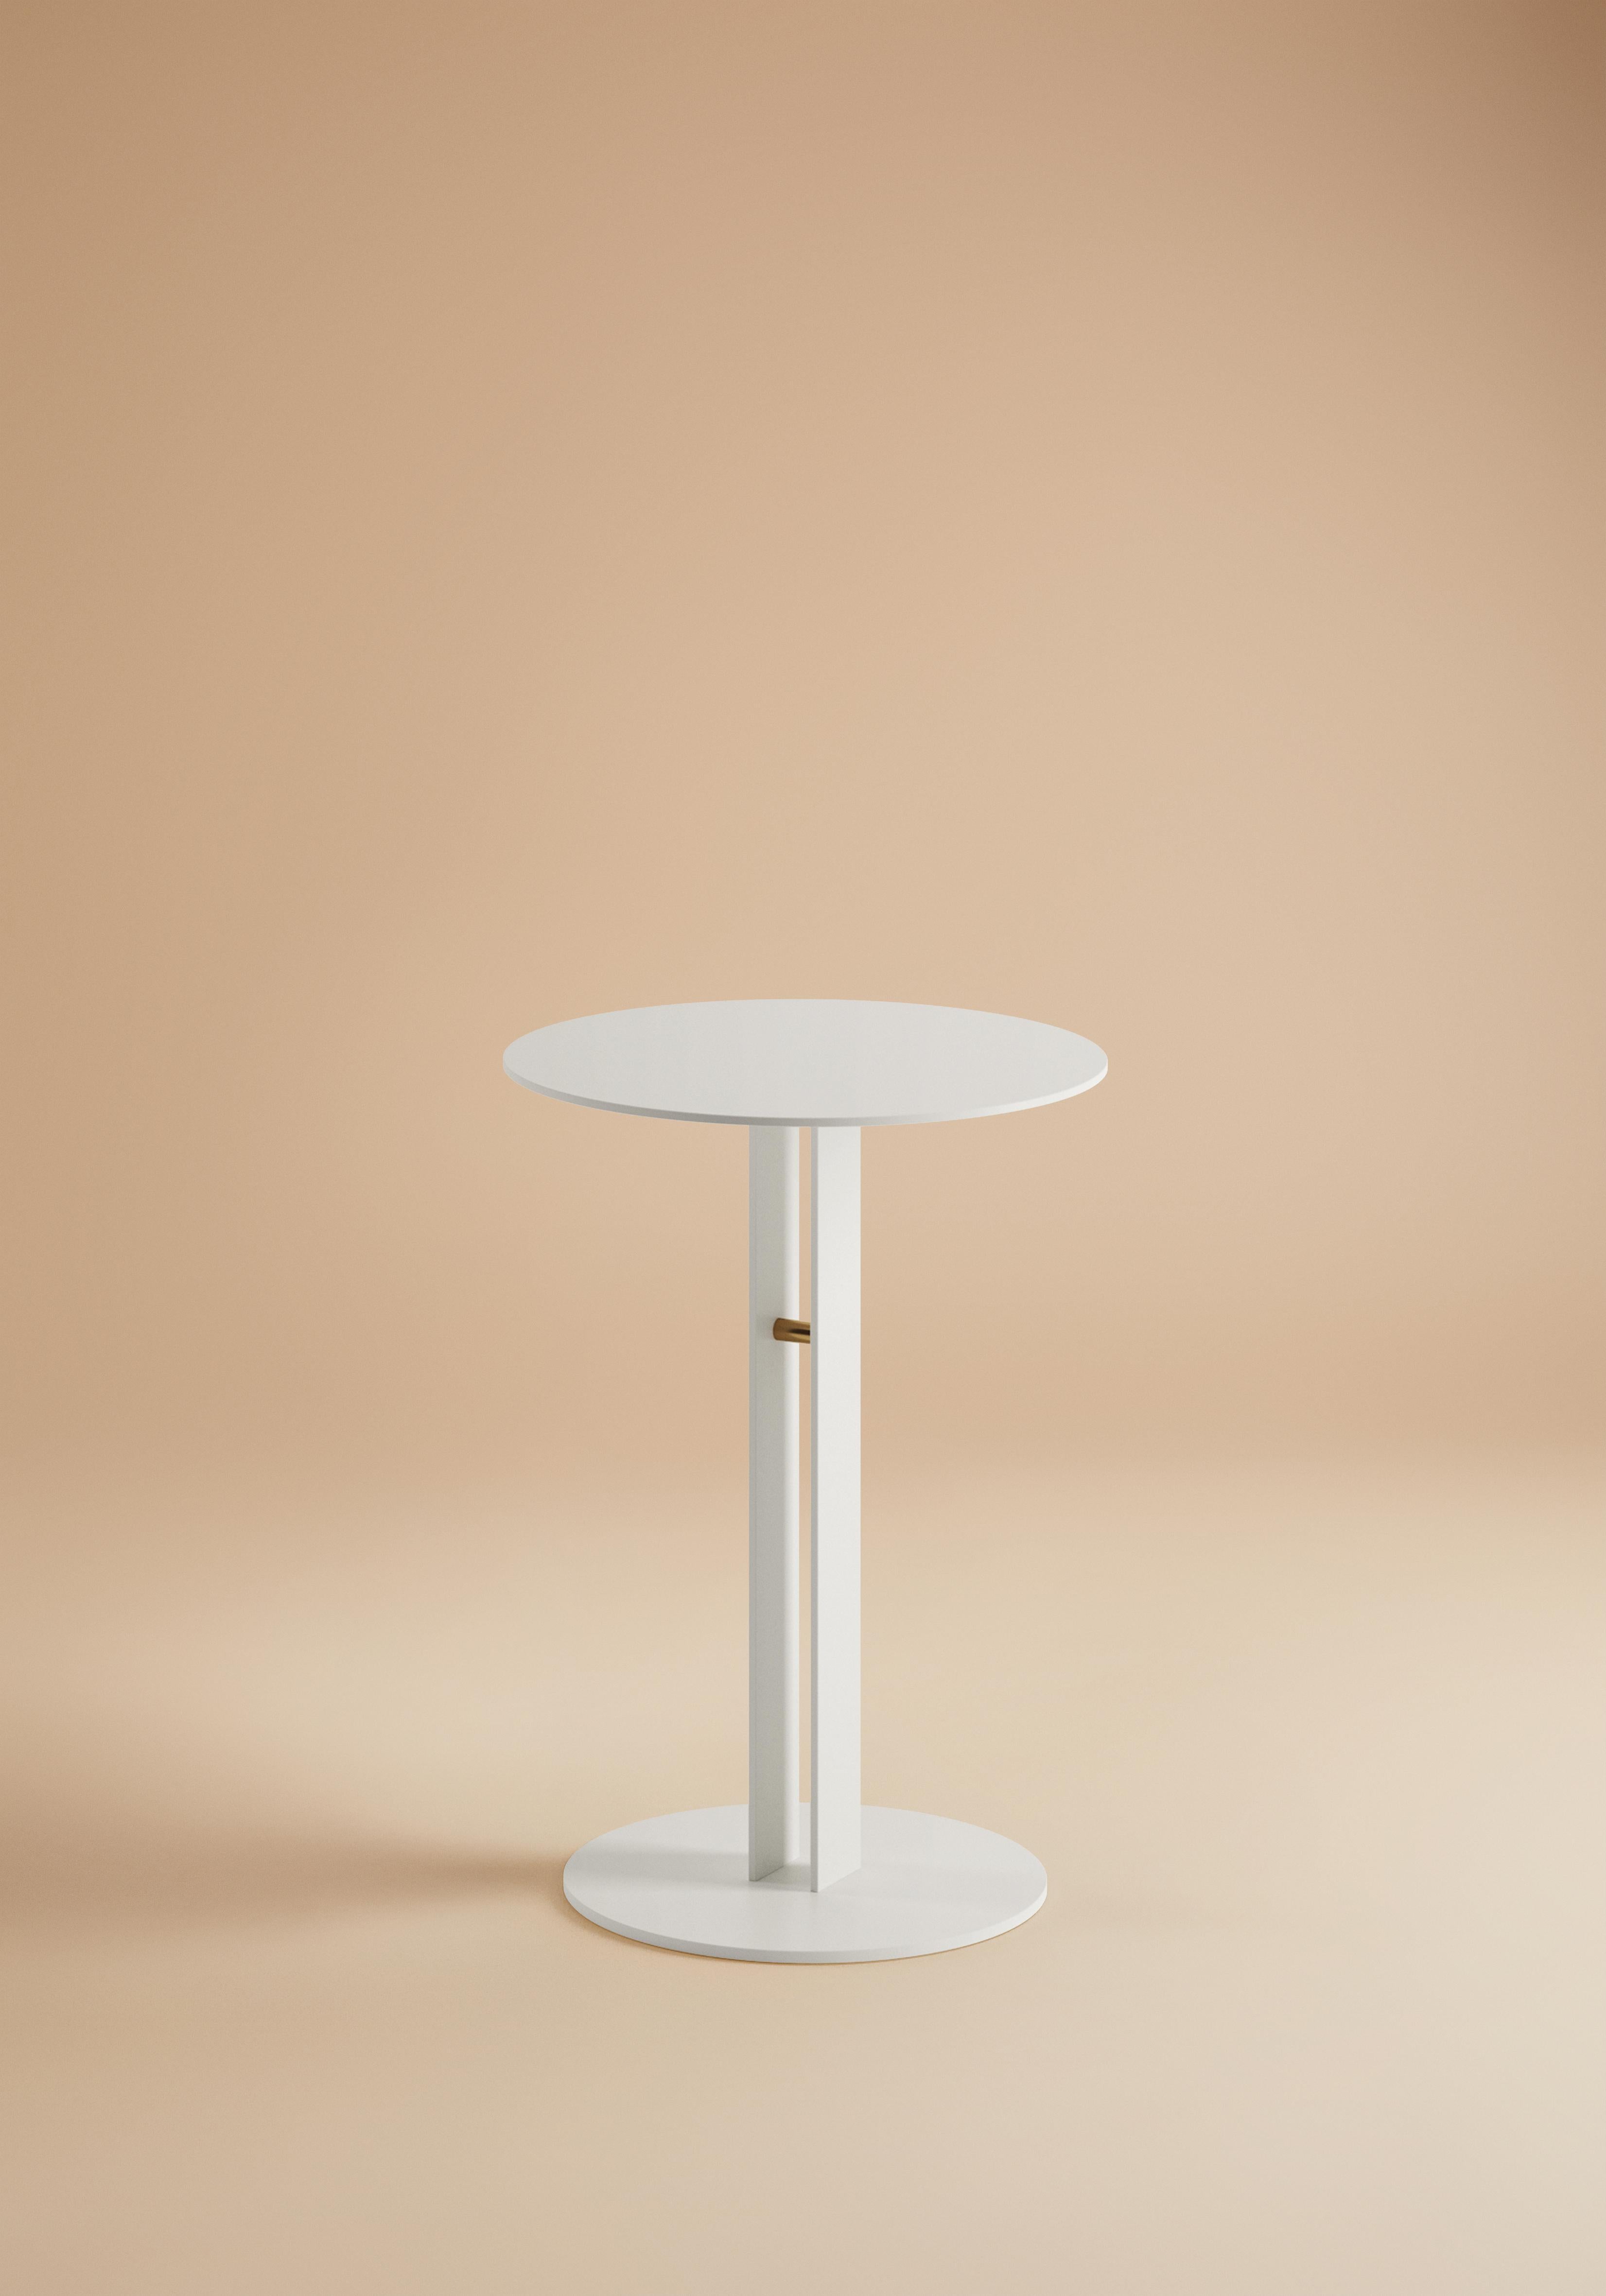 Designed with longtime collaborator Yaniv Chen of Master, the Portman side table is the result of a desire to create an occasional table with the thinnest profile possible – that almost disappears viewed from a certain angle – a goal achieved by